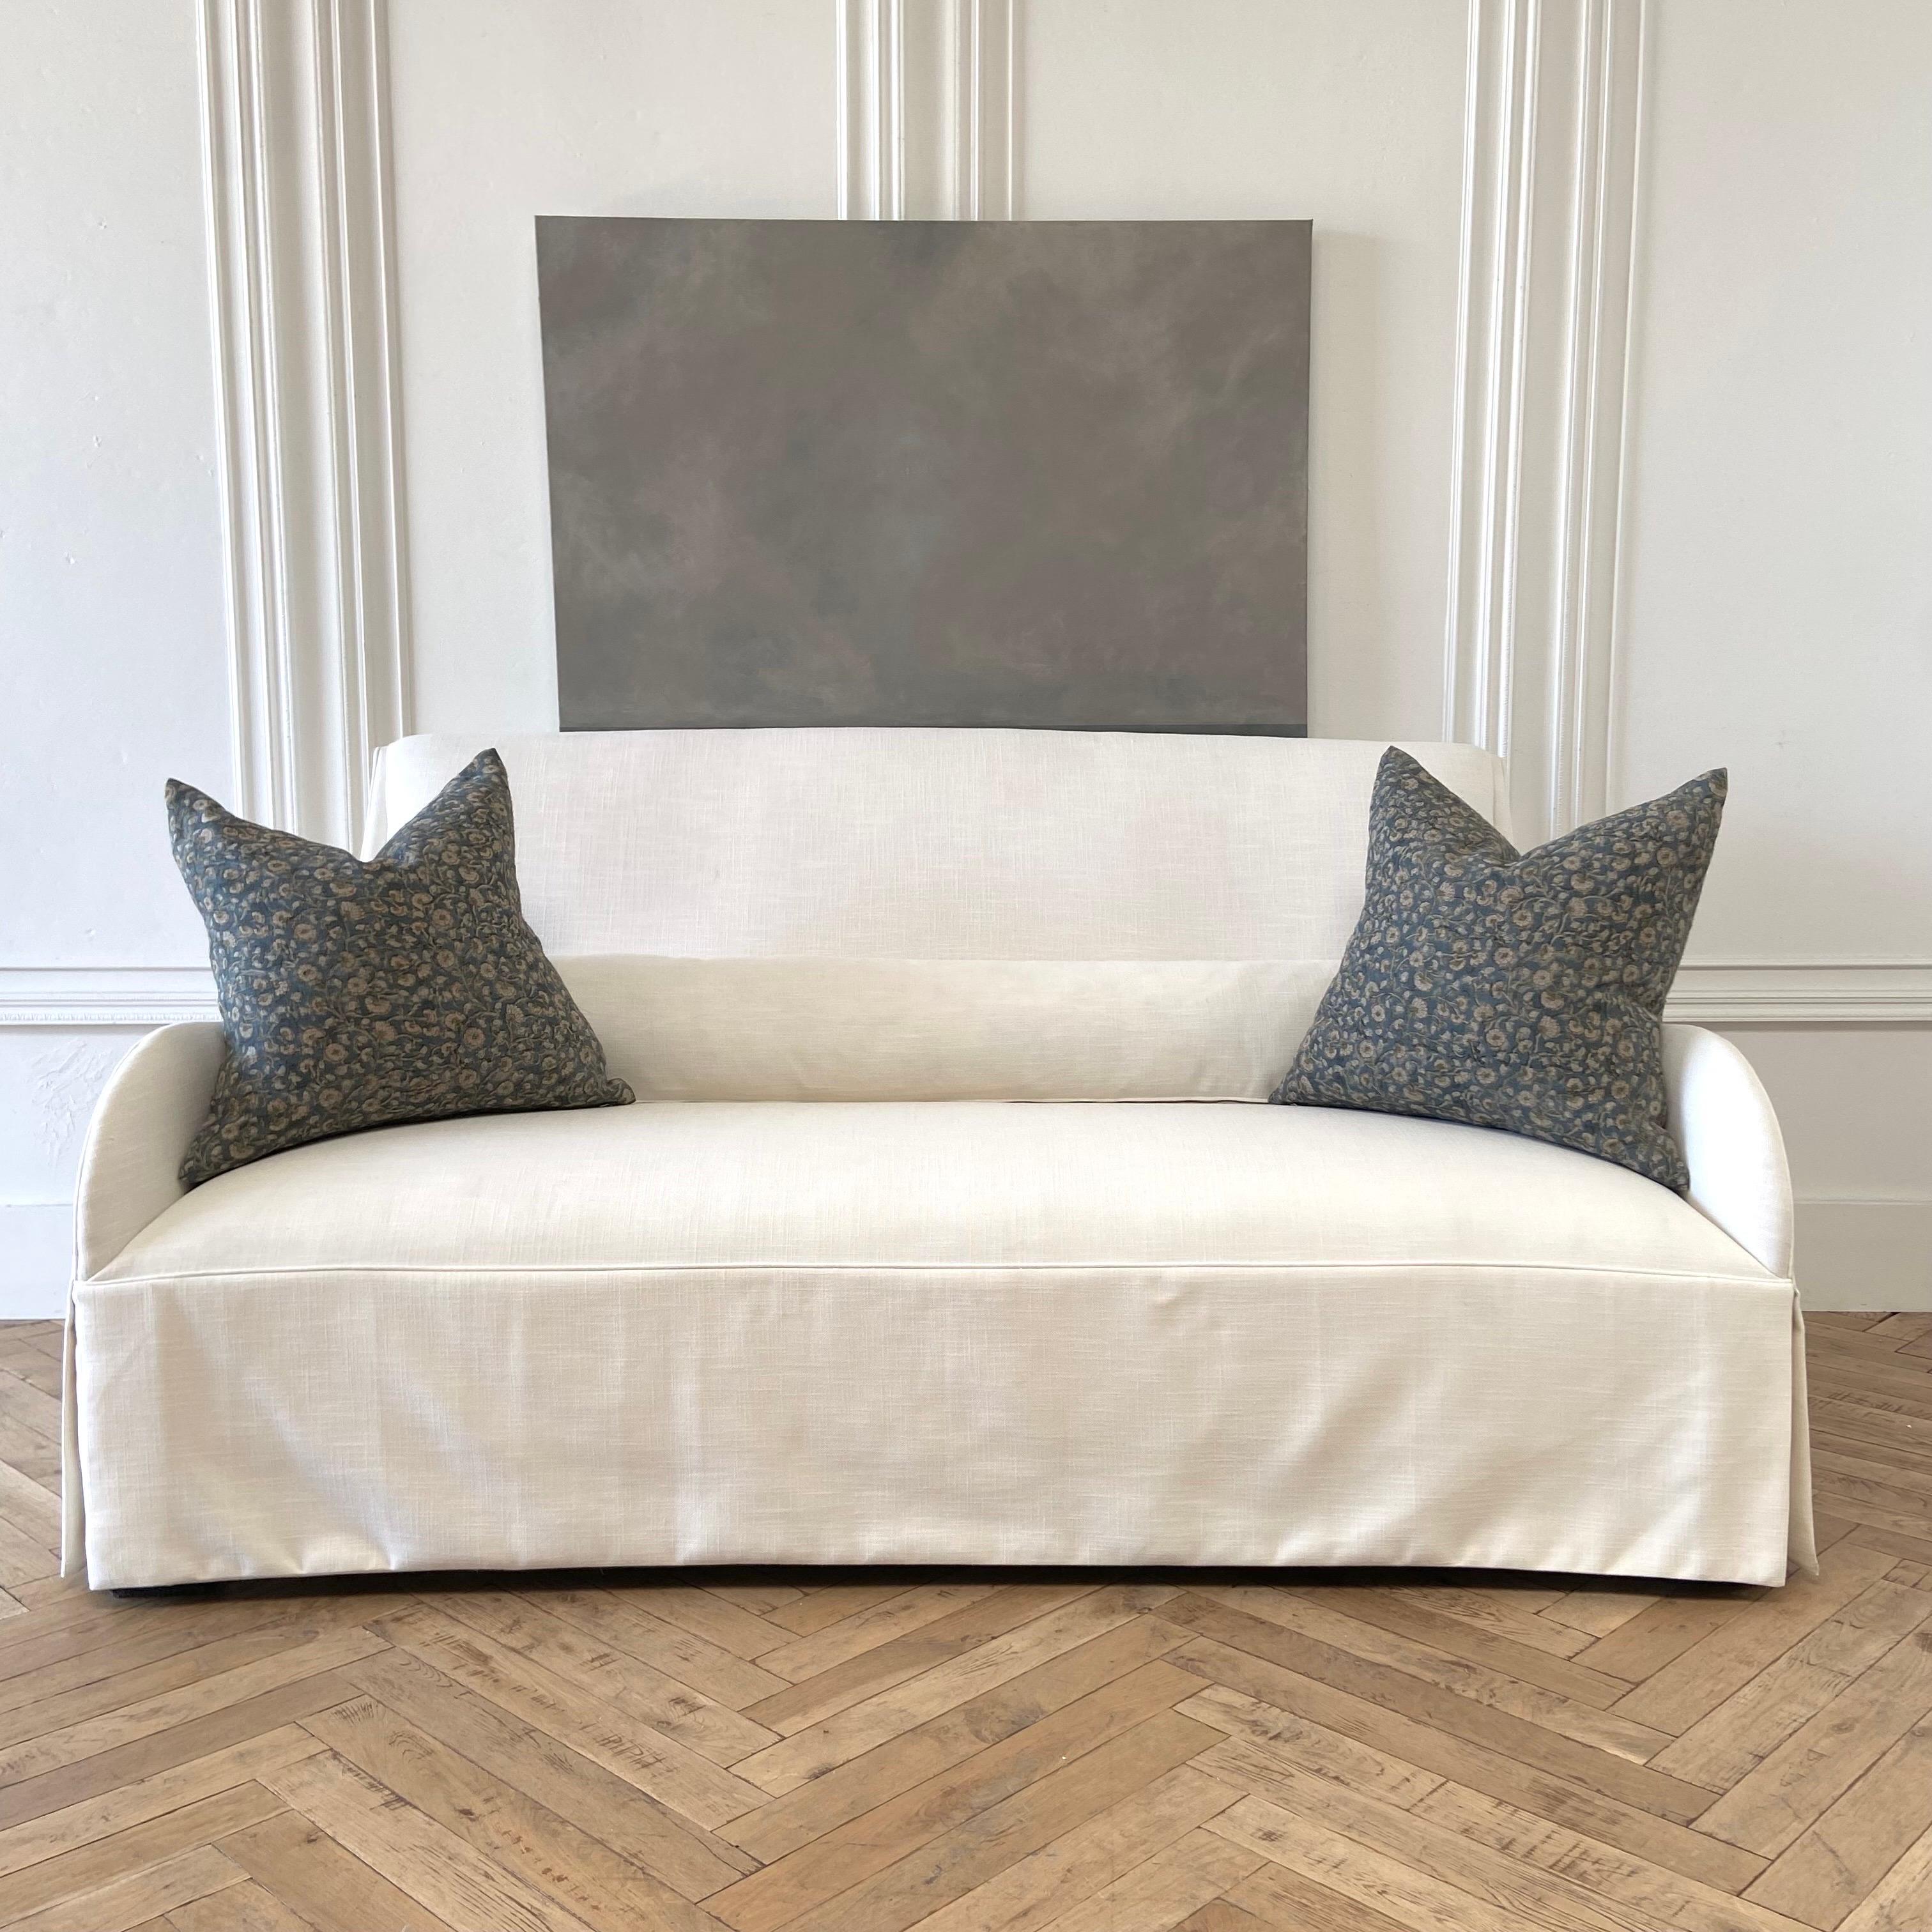 FLOOR SAMPLE SALE
Custom Upholstered Sofa / settee in a linen blend fabric
Color: off-white
Includes arm covers
pillows: Long lumbar included
Constructed of kiln dried alder wood, & HR foam
Made in North Carolina, USA 
Can be made in any of our